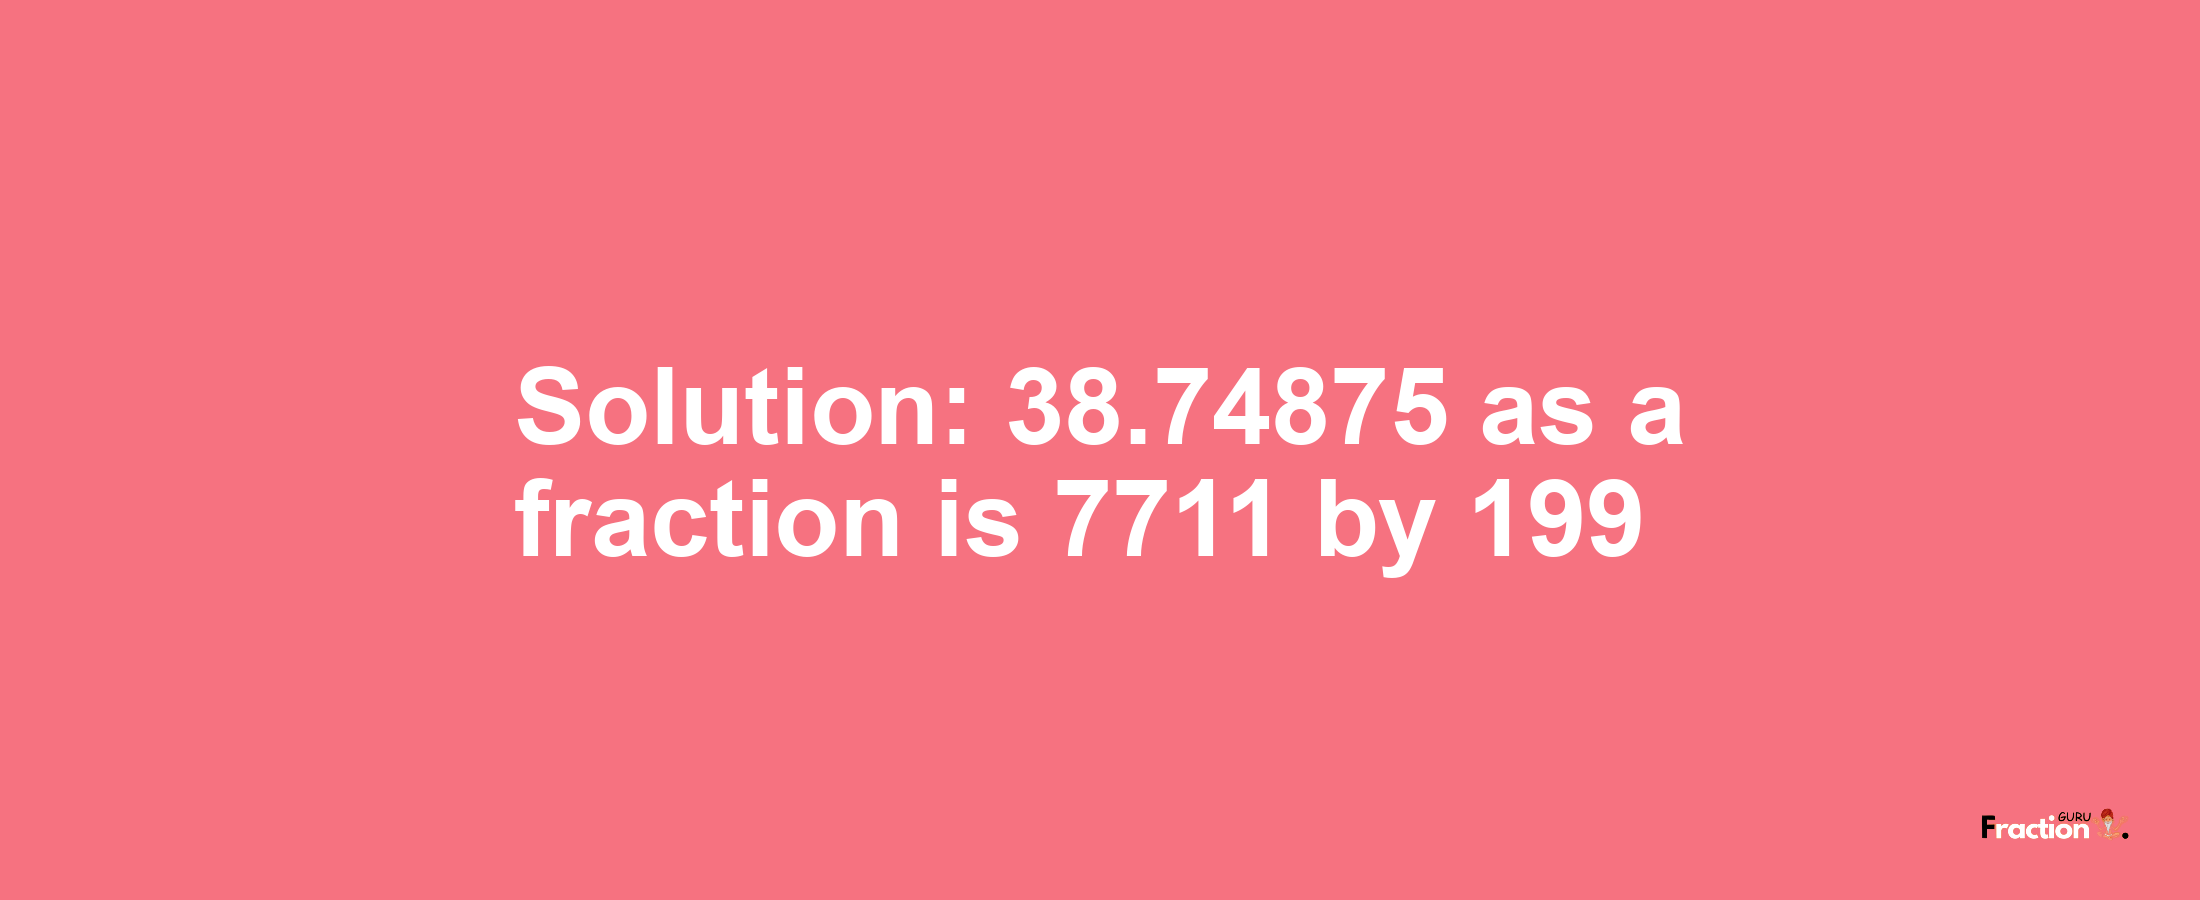 Solution:38.74875 as a fraction is 7711/199